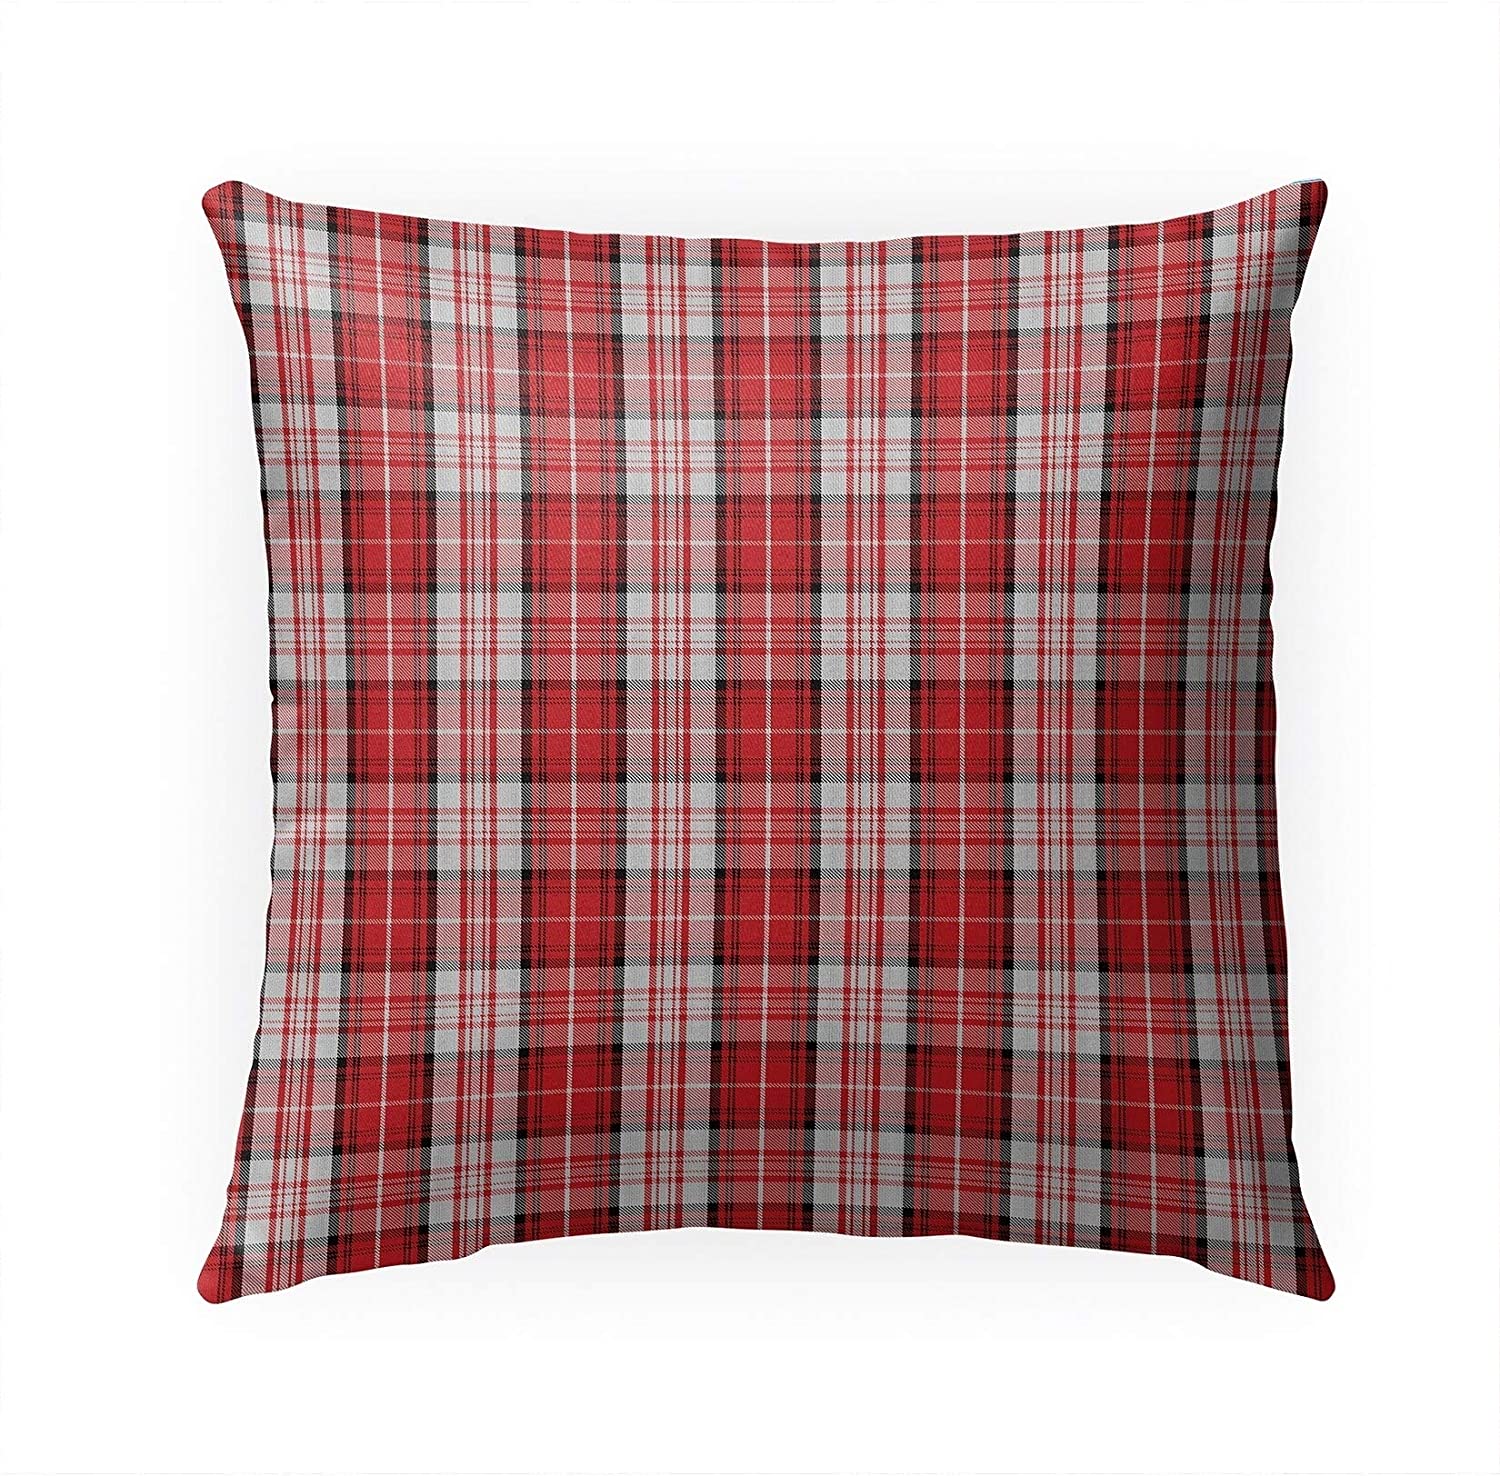 Mad Plaid Five Indoor|Outdoor Pillow by 18x18 Black Plaid Modern Contemporary Polyester Removable Cover